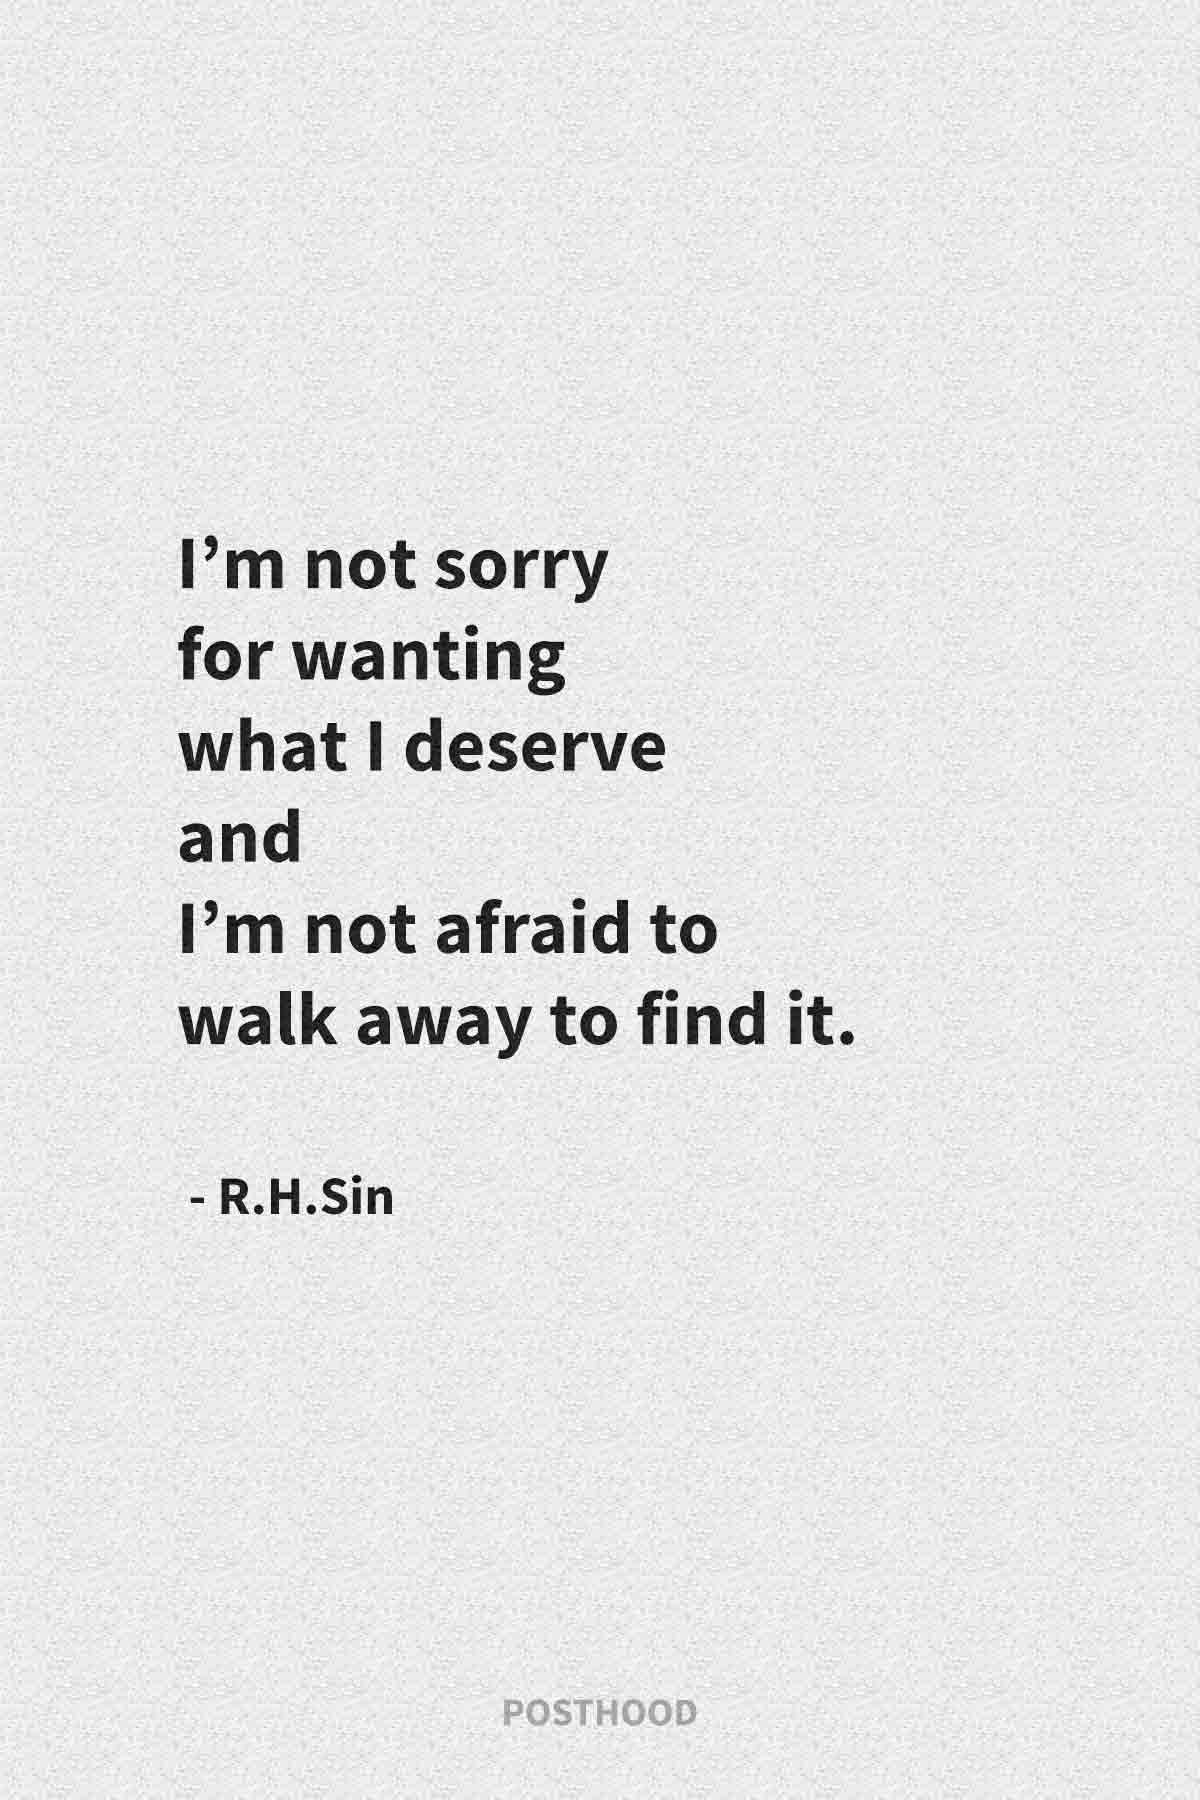 40 R. H. Sin quotes that guarantee you’ll feel stronger when they leave you or hurt you. Inspiring strong women quotes.